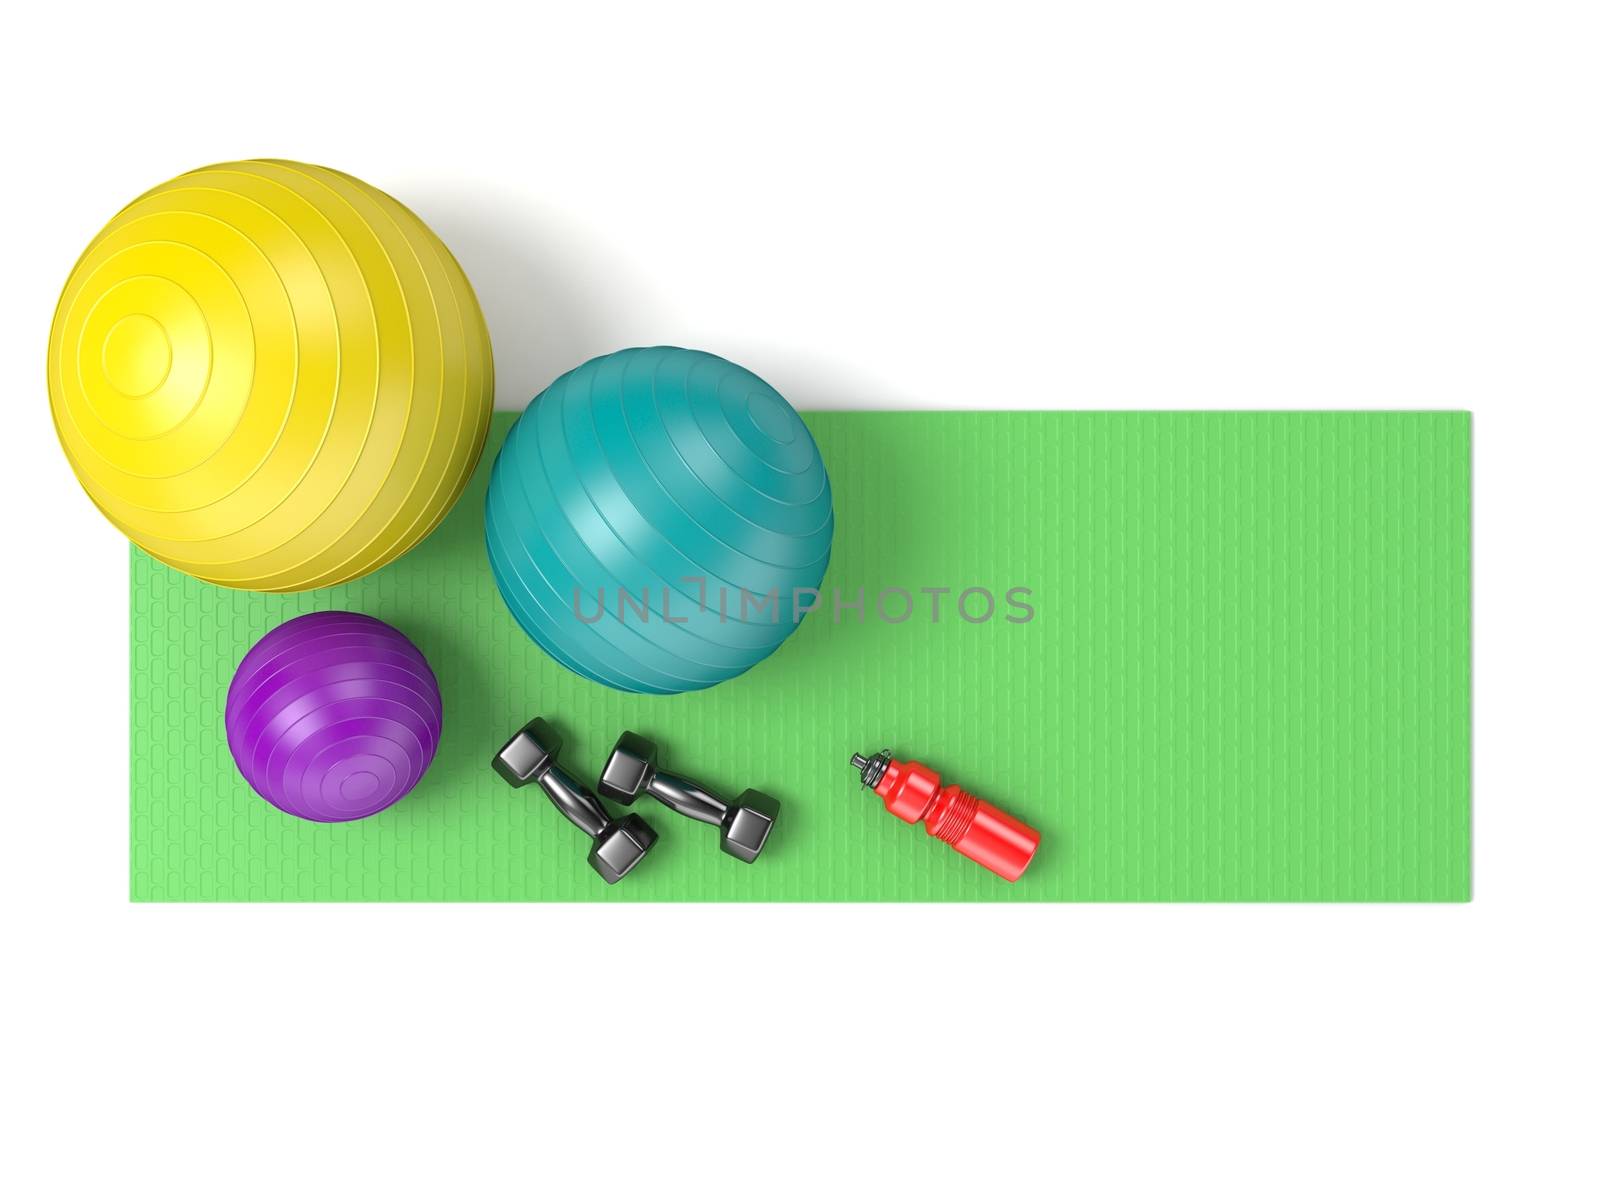 Fitness ball, dumbbells and plastic water bottle on green yoga mat. Top view. 3D render illustration isolated on white background